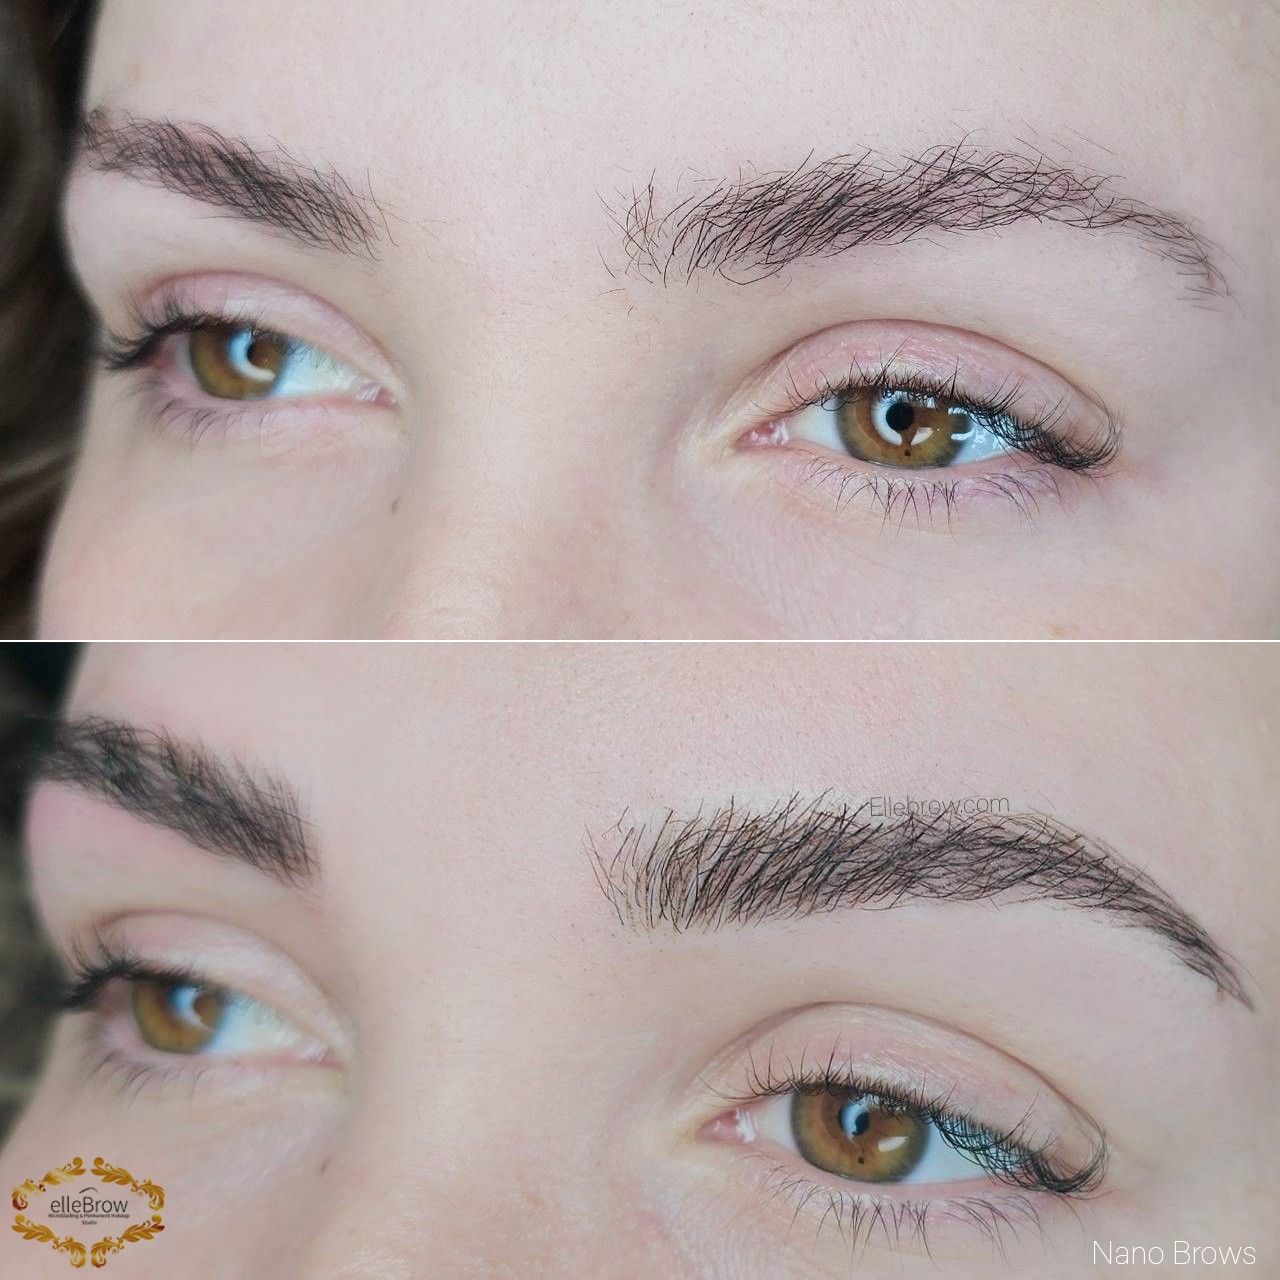 Nano Brows over botched Eyebrow Lamination - Before and After